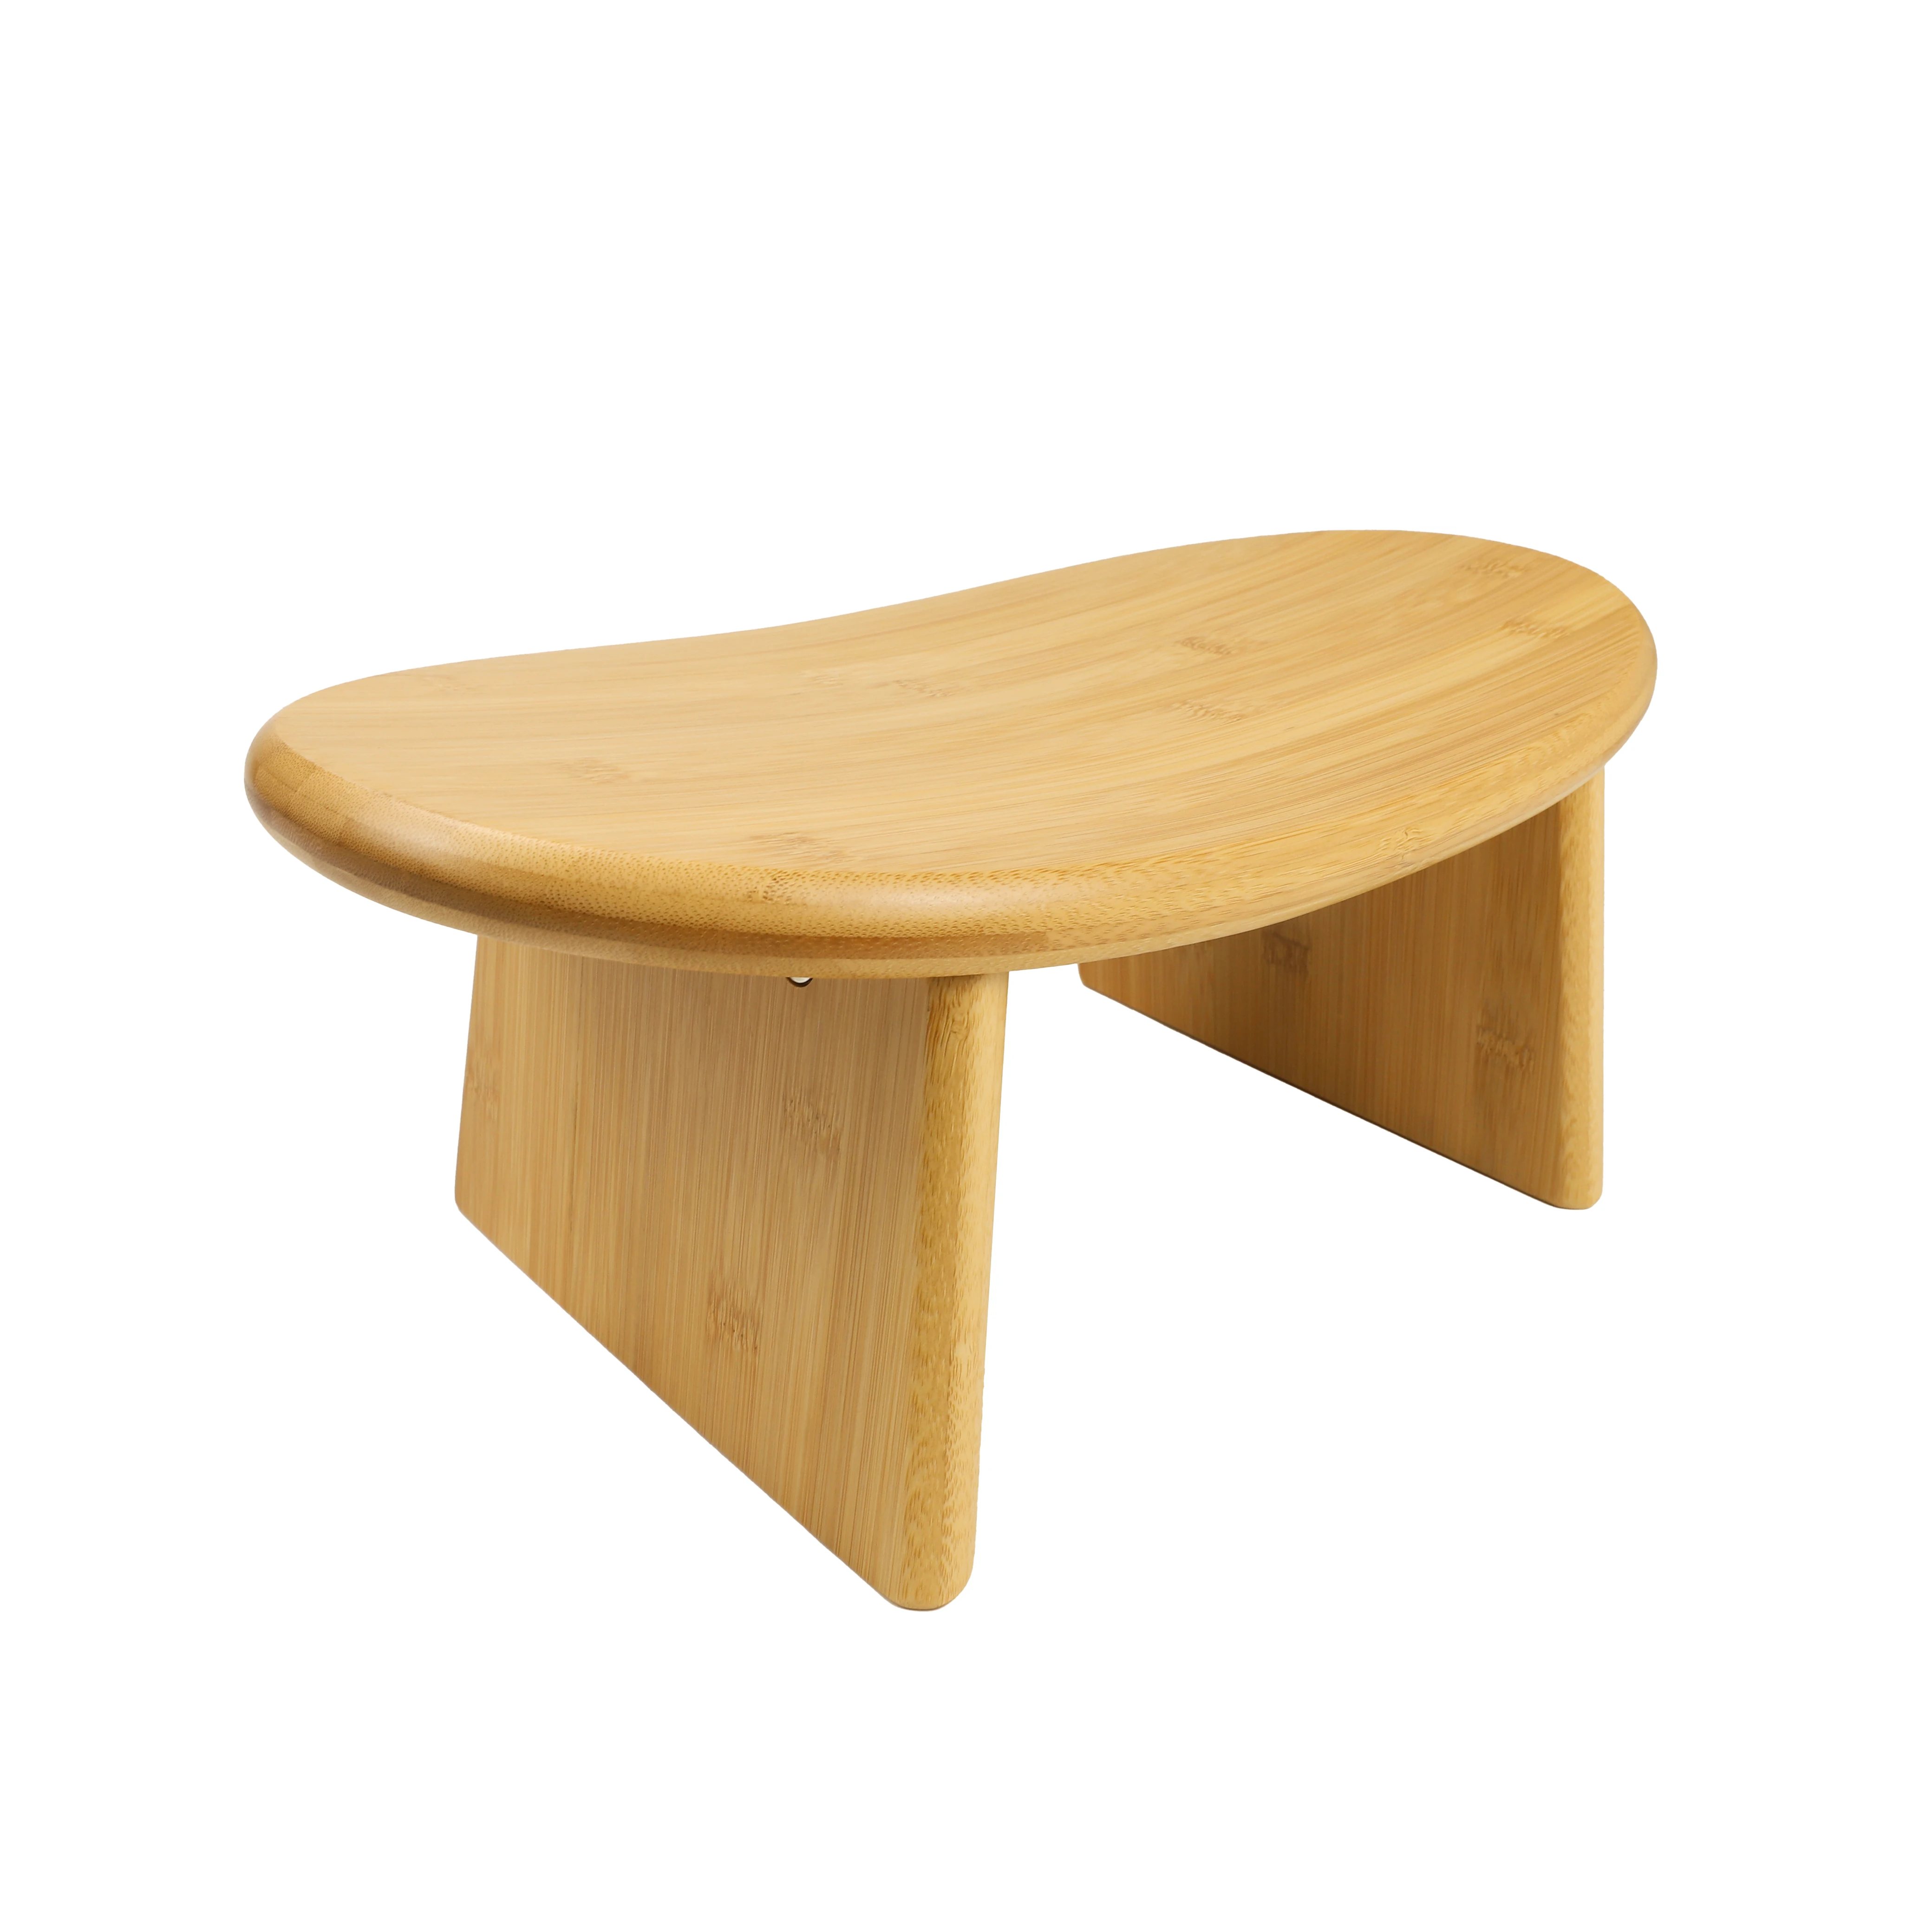 Other Bamboo Furniture